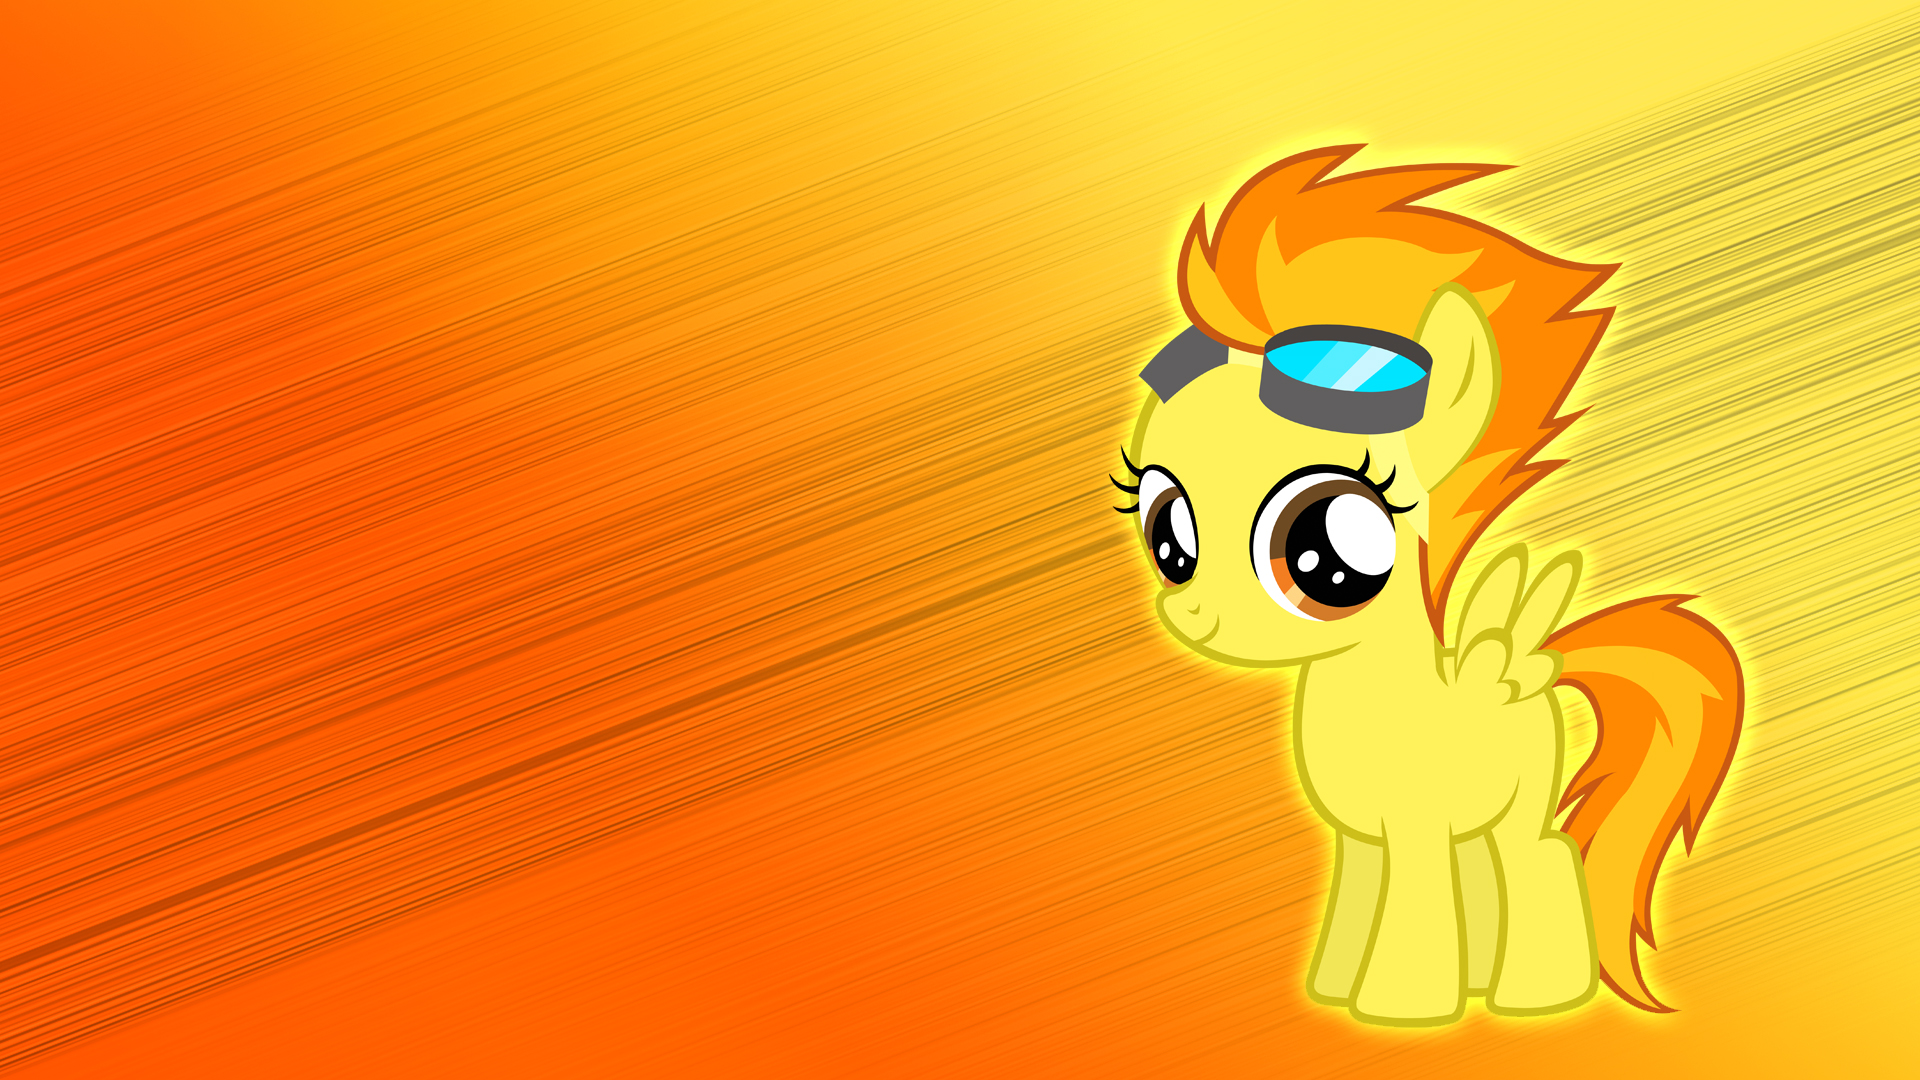 Filly Spitfire Wallpaper by Blackm3sh and Pappkarton